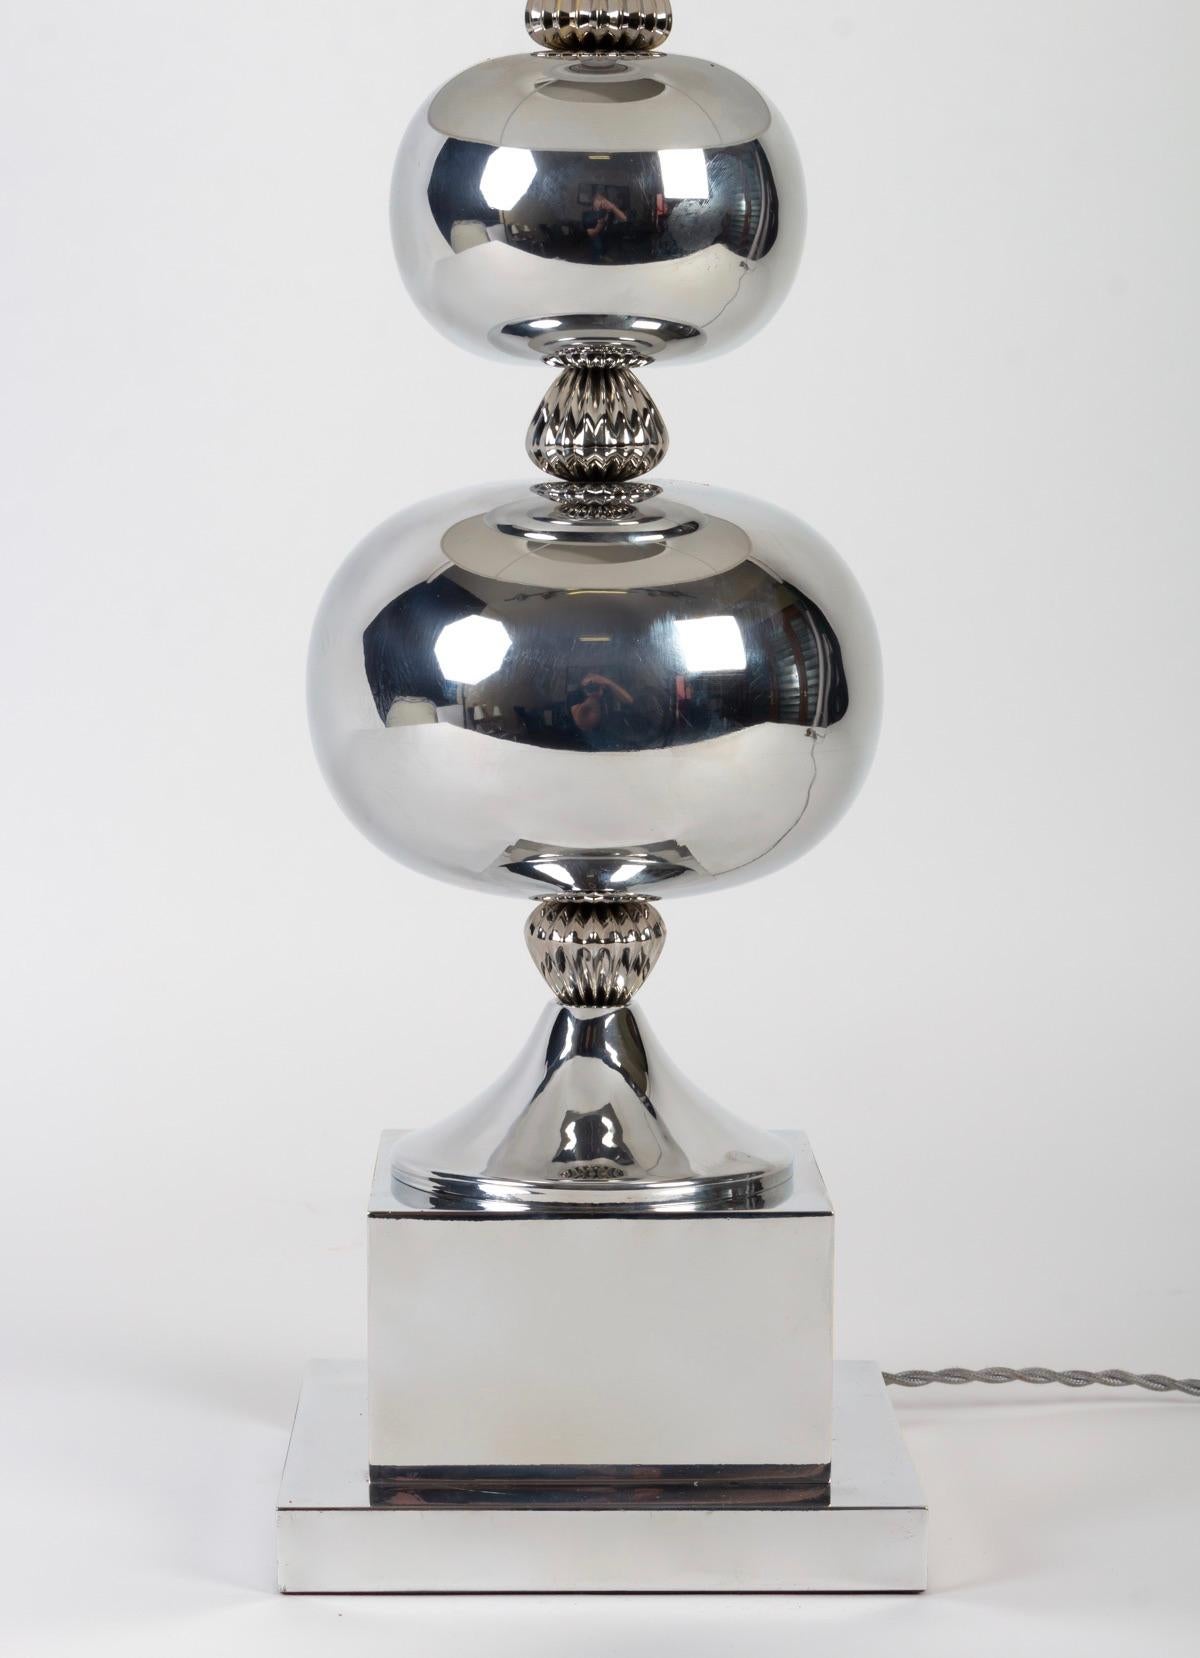 Elegant lamp with silver balls made in the 1970s. P. Barbier

Composed of a square section base topped by a cube on which is positioned a shower foot.
On the top of the shower base, two silver balls of different sizes interspersed with three small